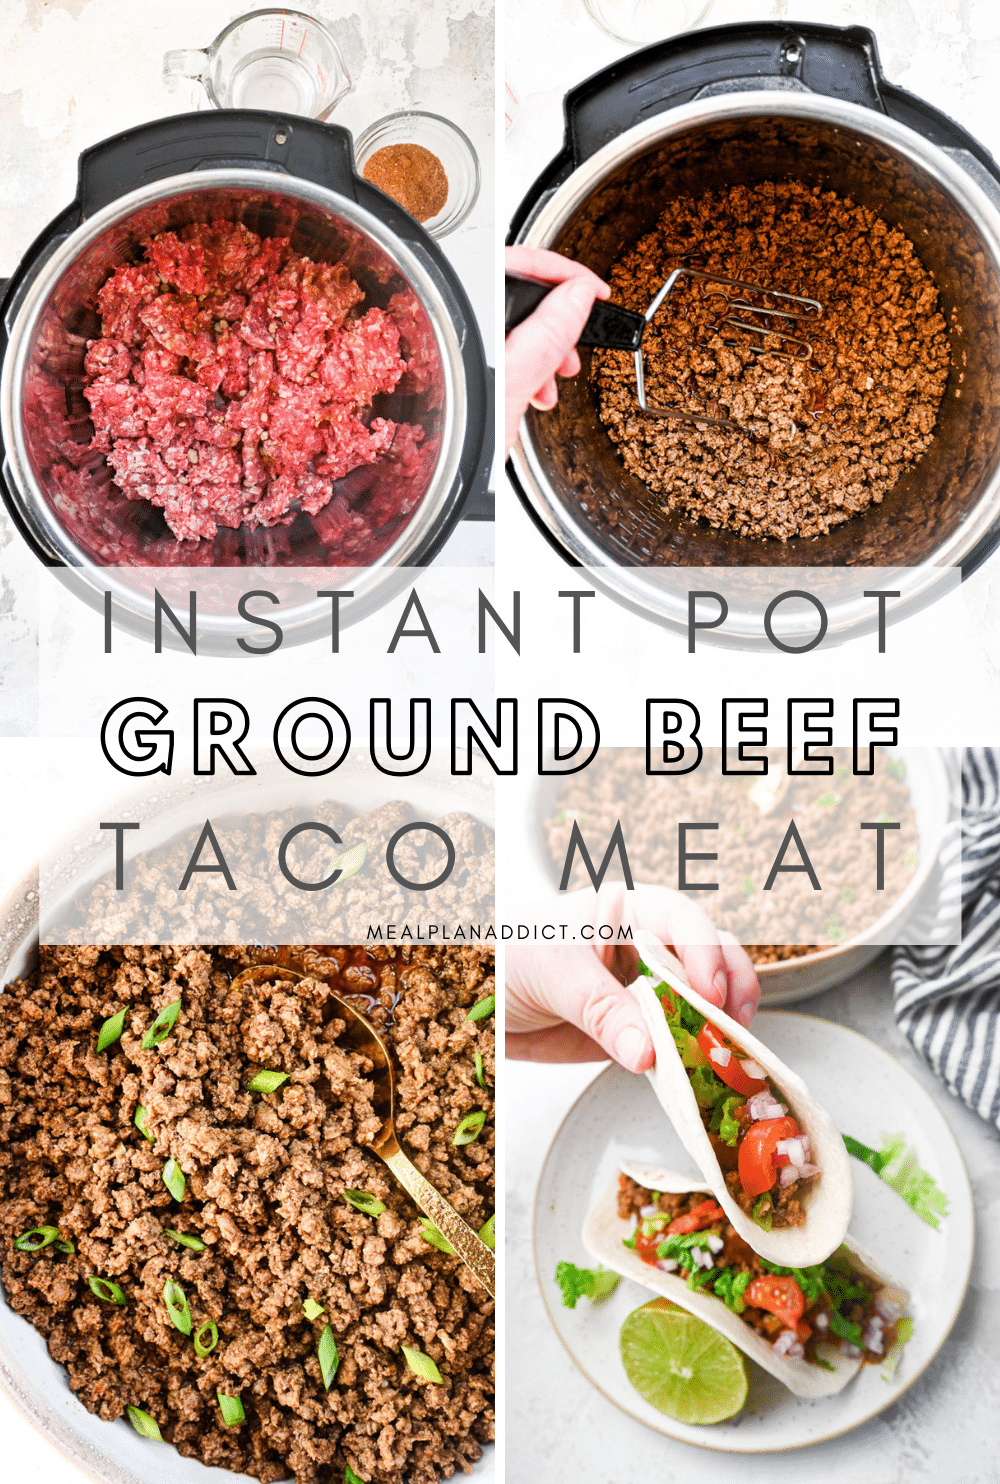 Taco Tuesday Meal Prep with this Ground Beef Taco Meat Recipe